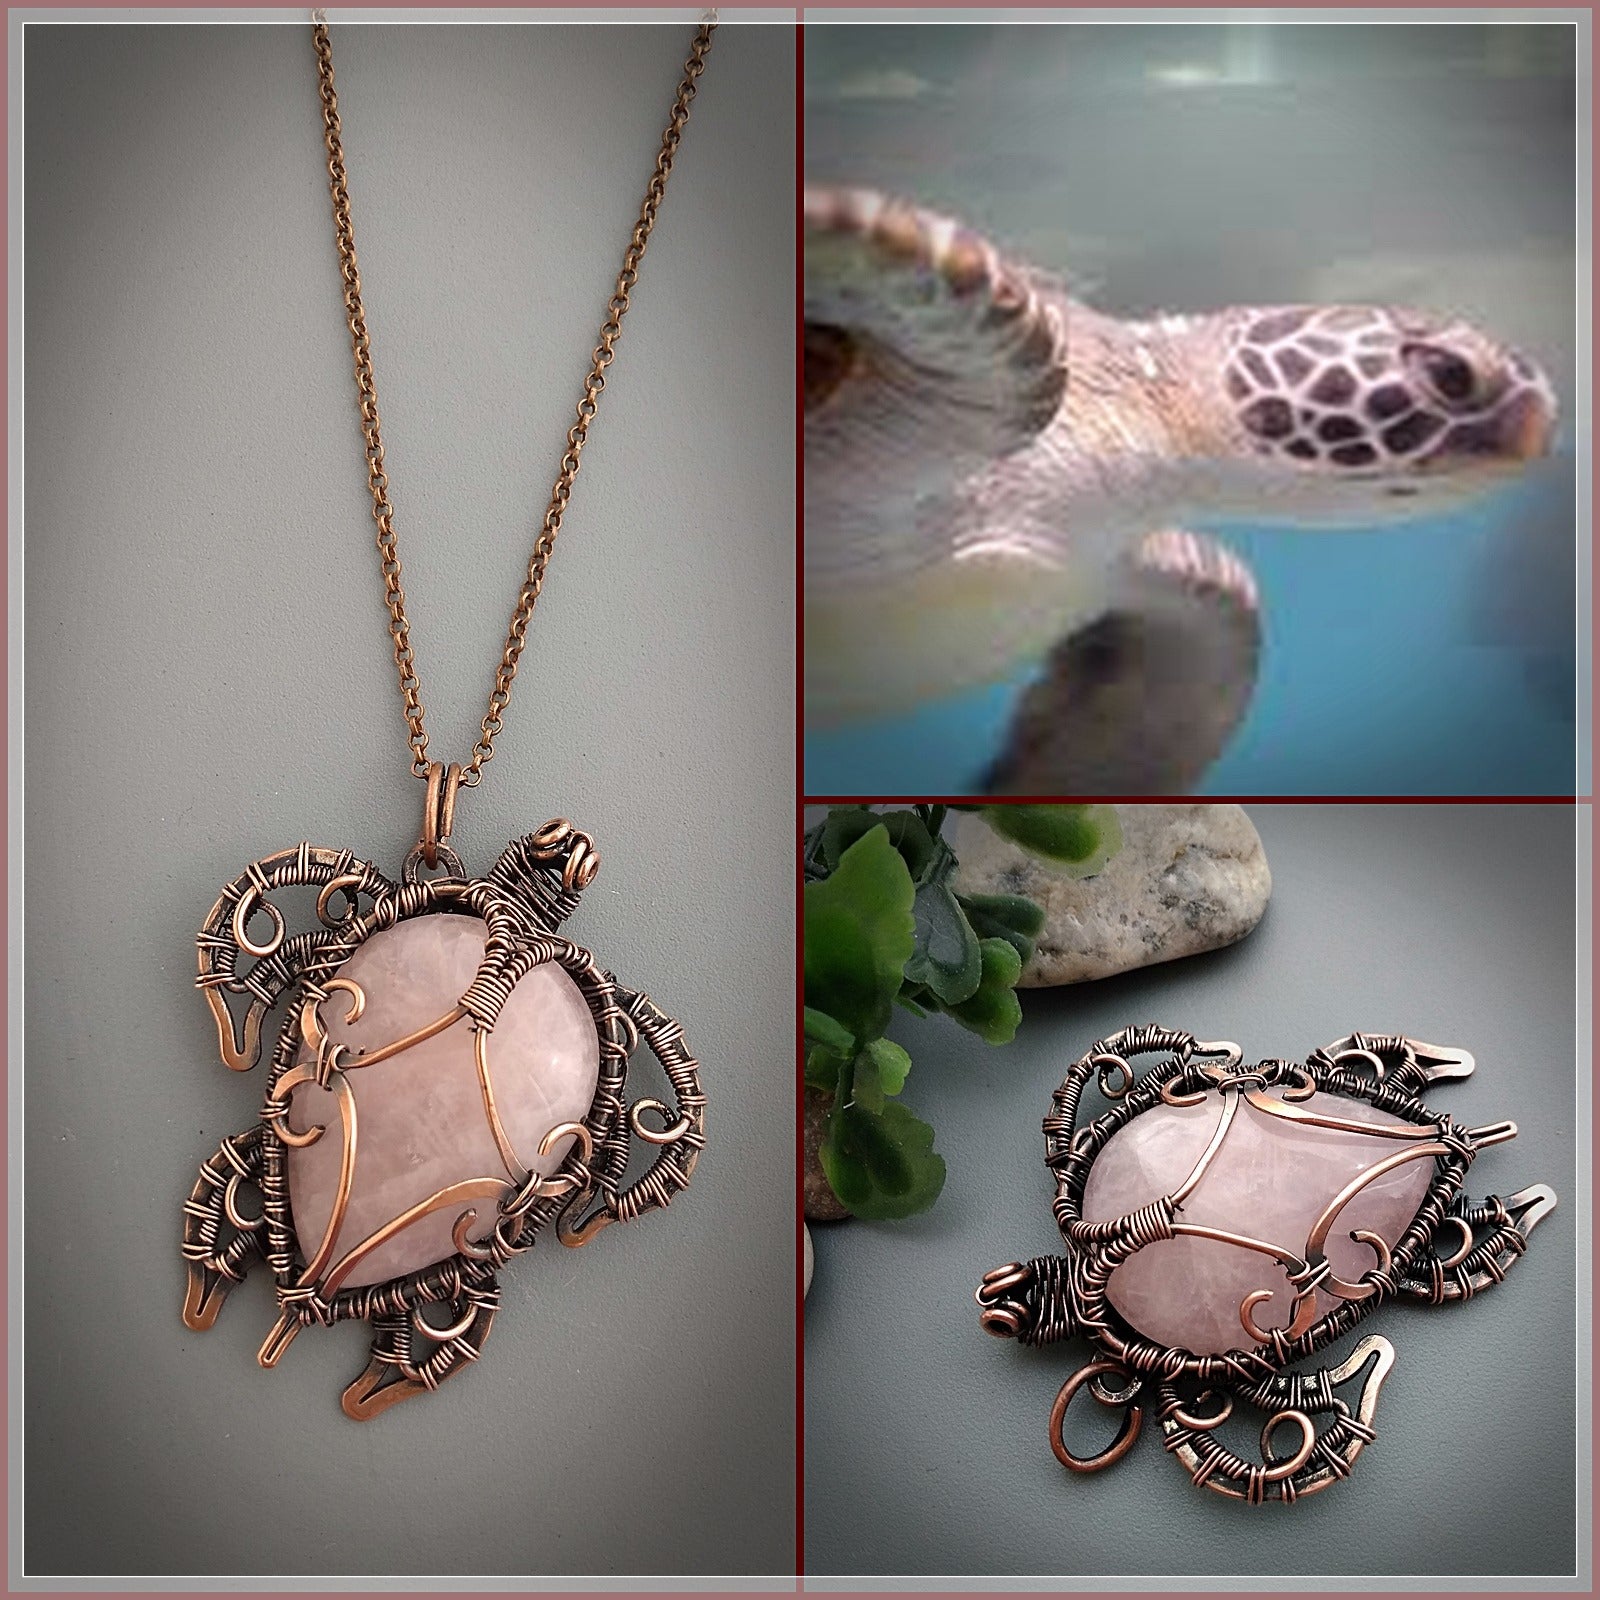 Handmade turtle necklace with natural rose quartz stone